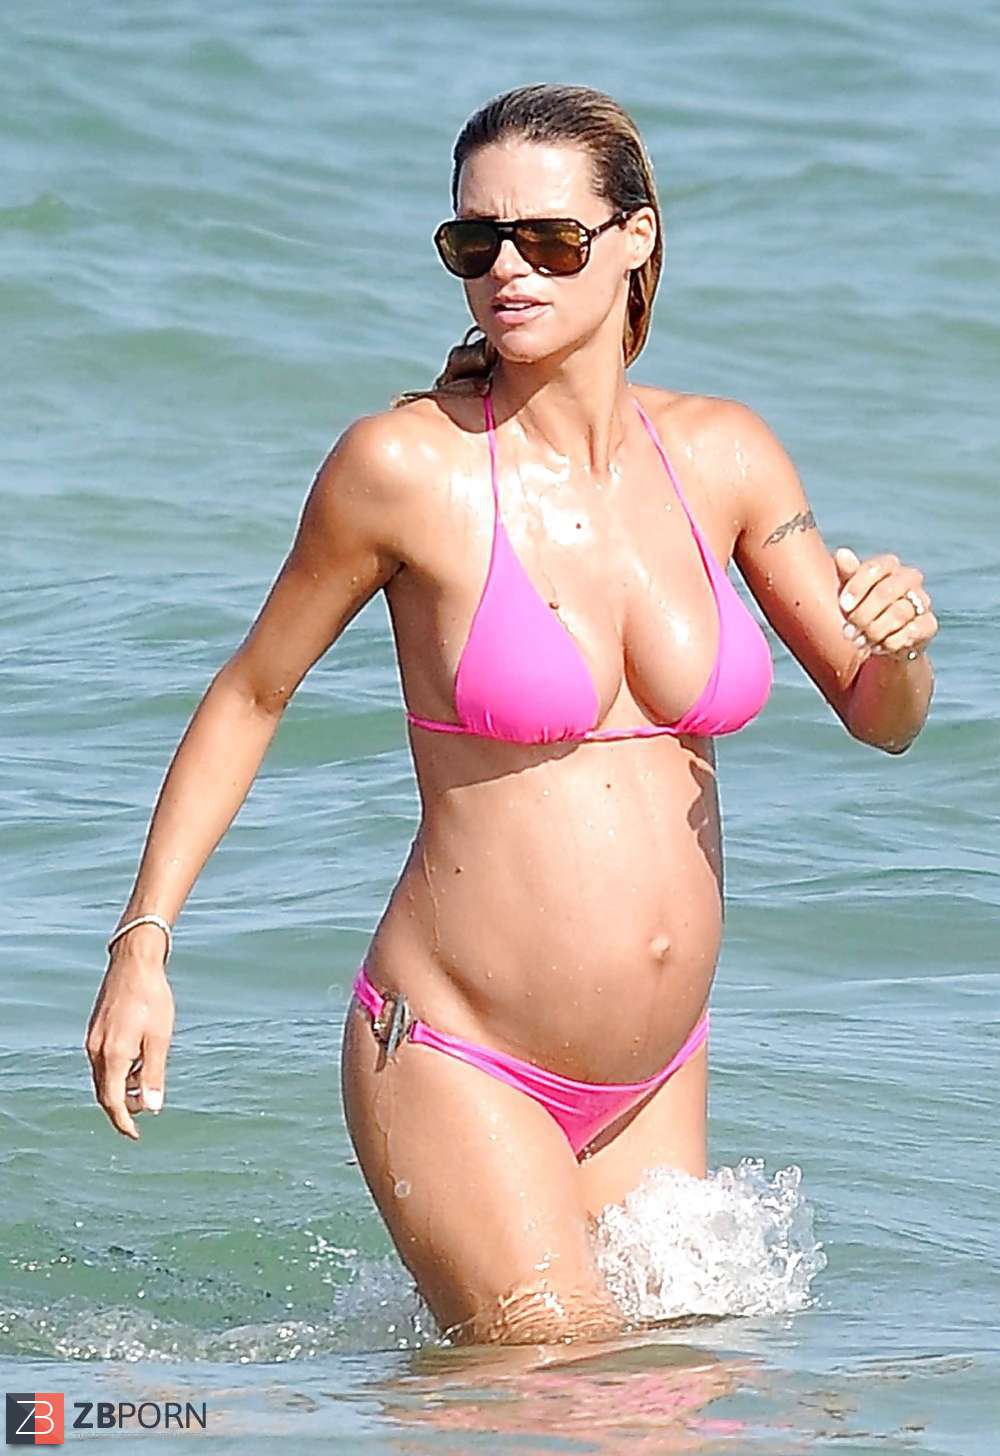 Three Pregnant Porn - Steamy Pregnant Celeb Michelle Hunziker in Bathing Suit ...